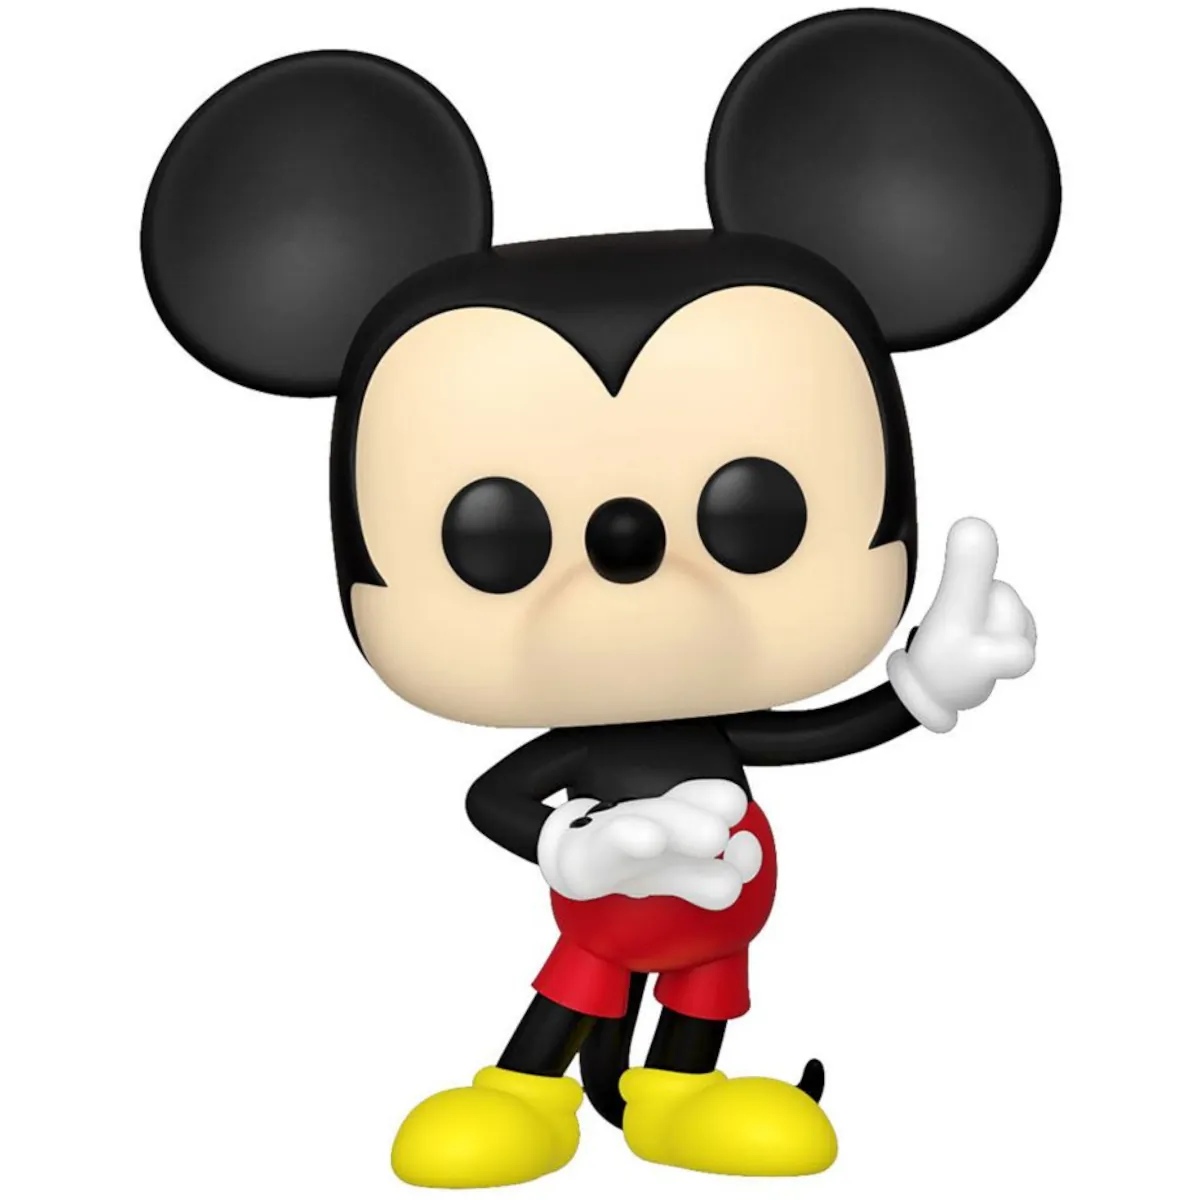 FK59623 Funko Pop! Disney - Mickey and Friends - Mickey Mouse Collectable Vinyl Figure